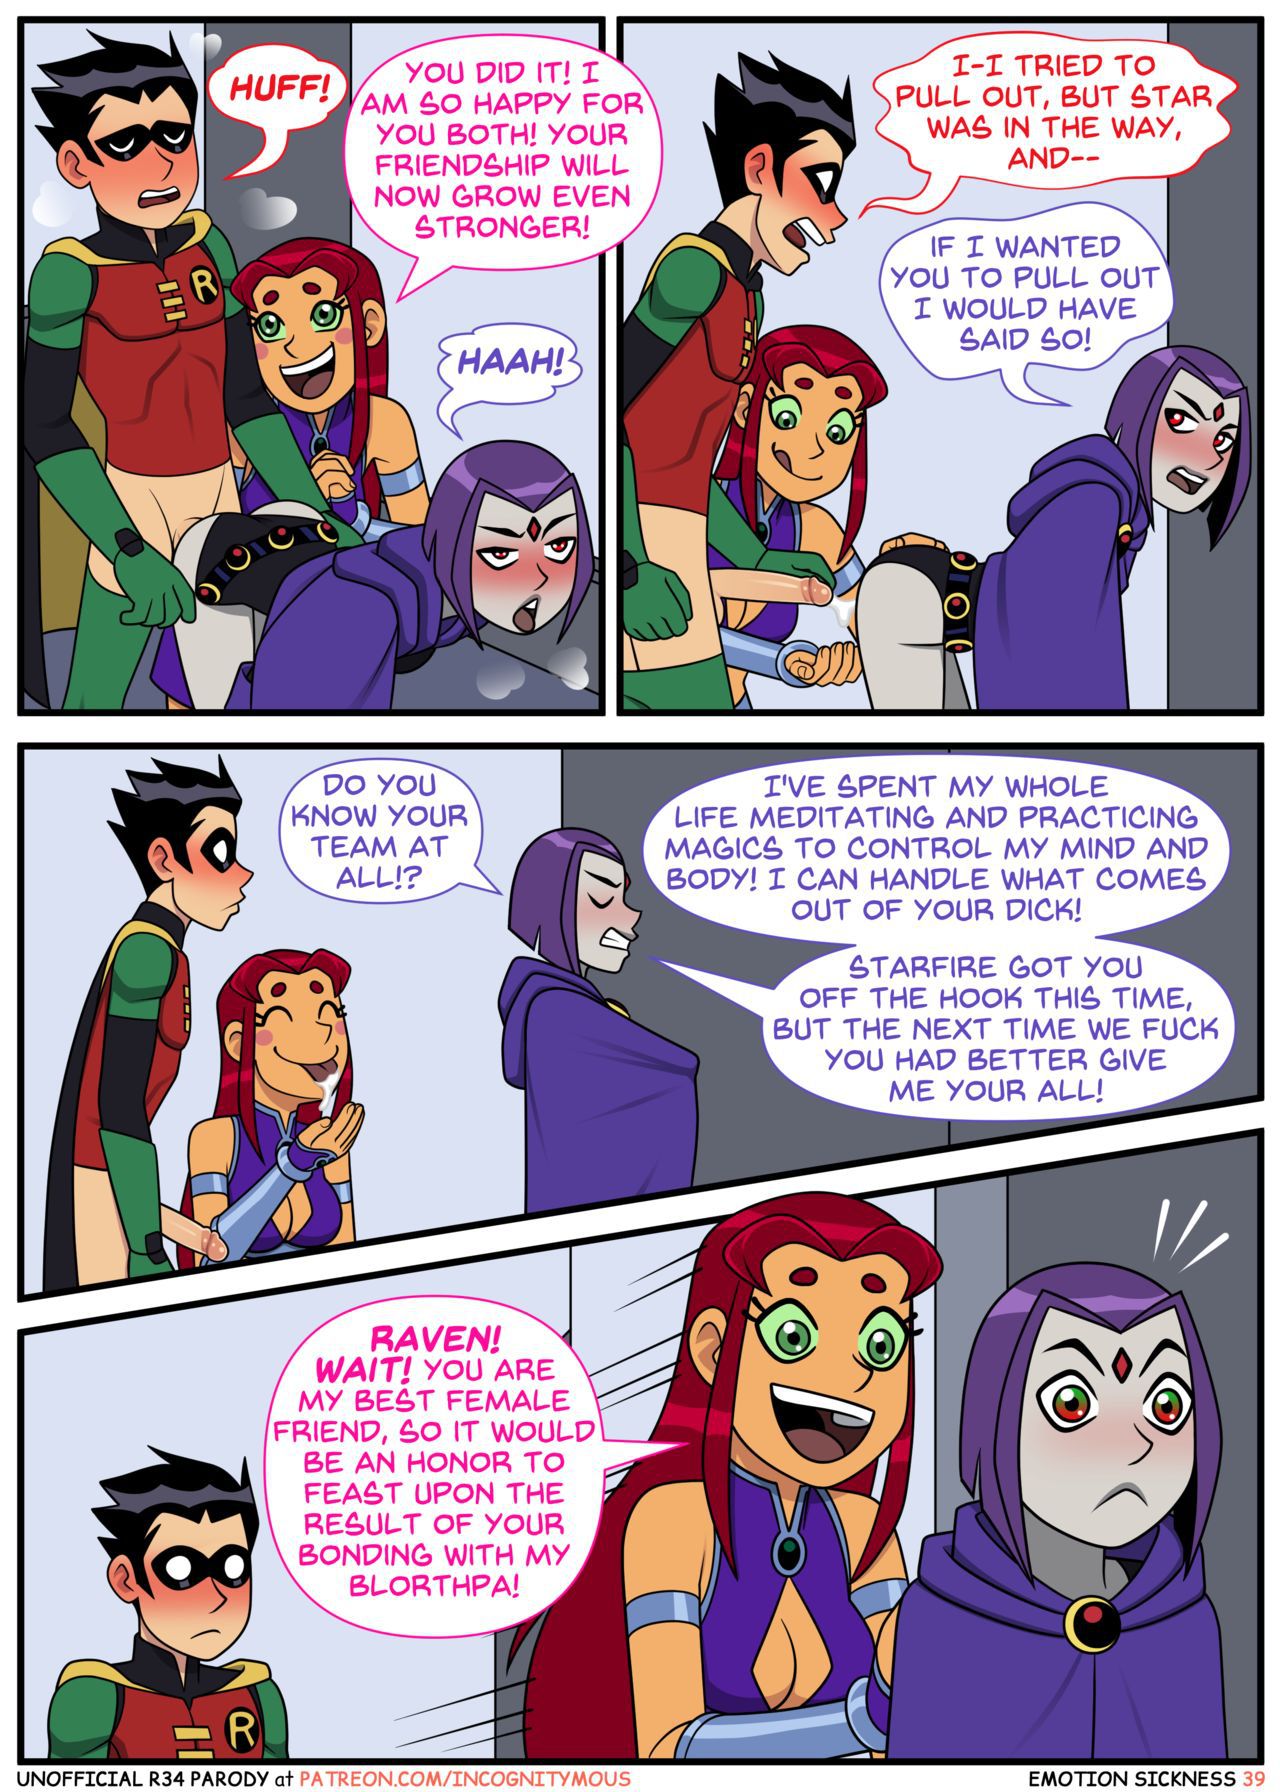 (Incognitymous) Teen Titans - Emotion Sickness(ongoing) 38